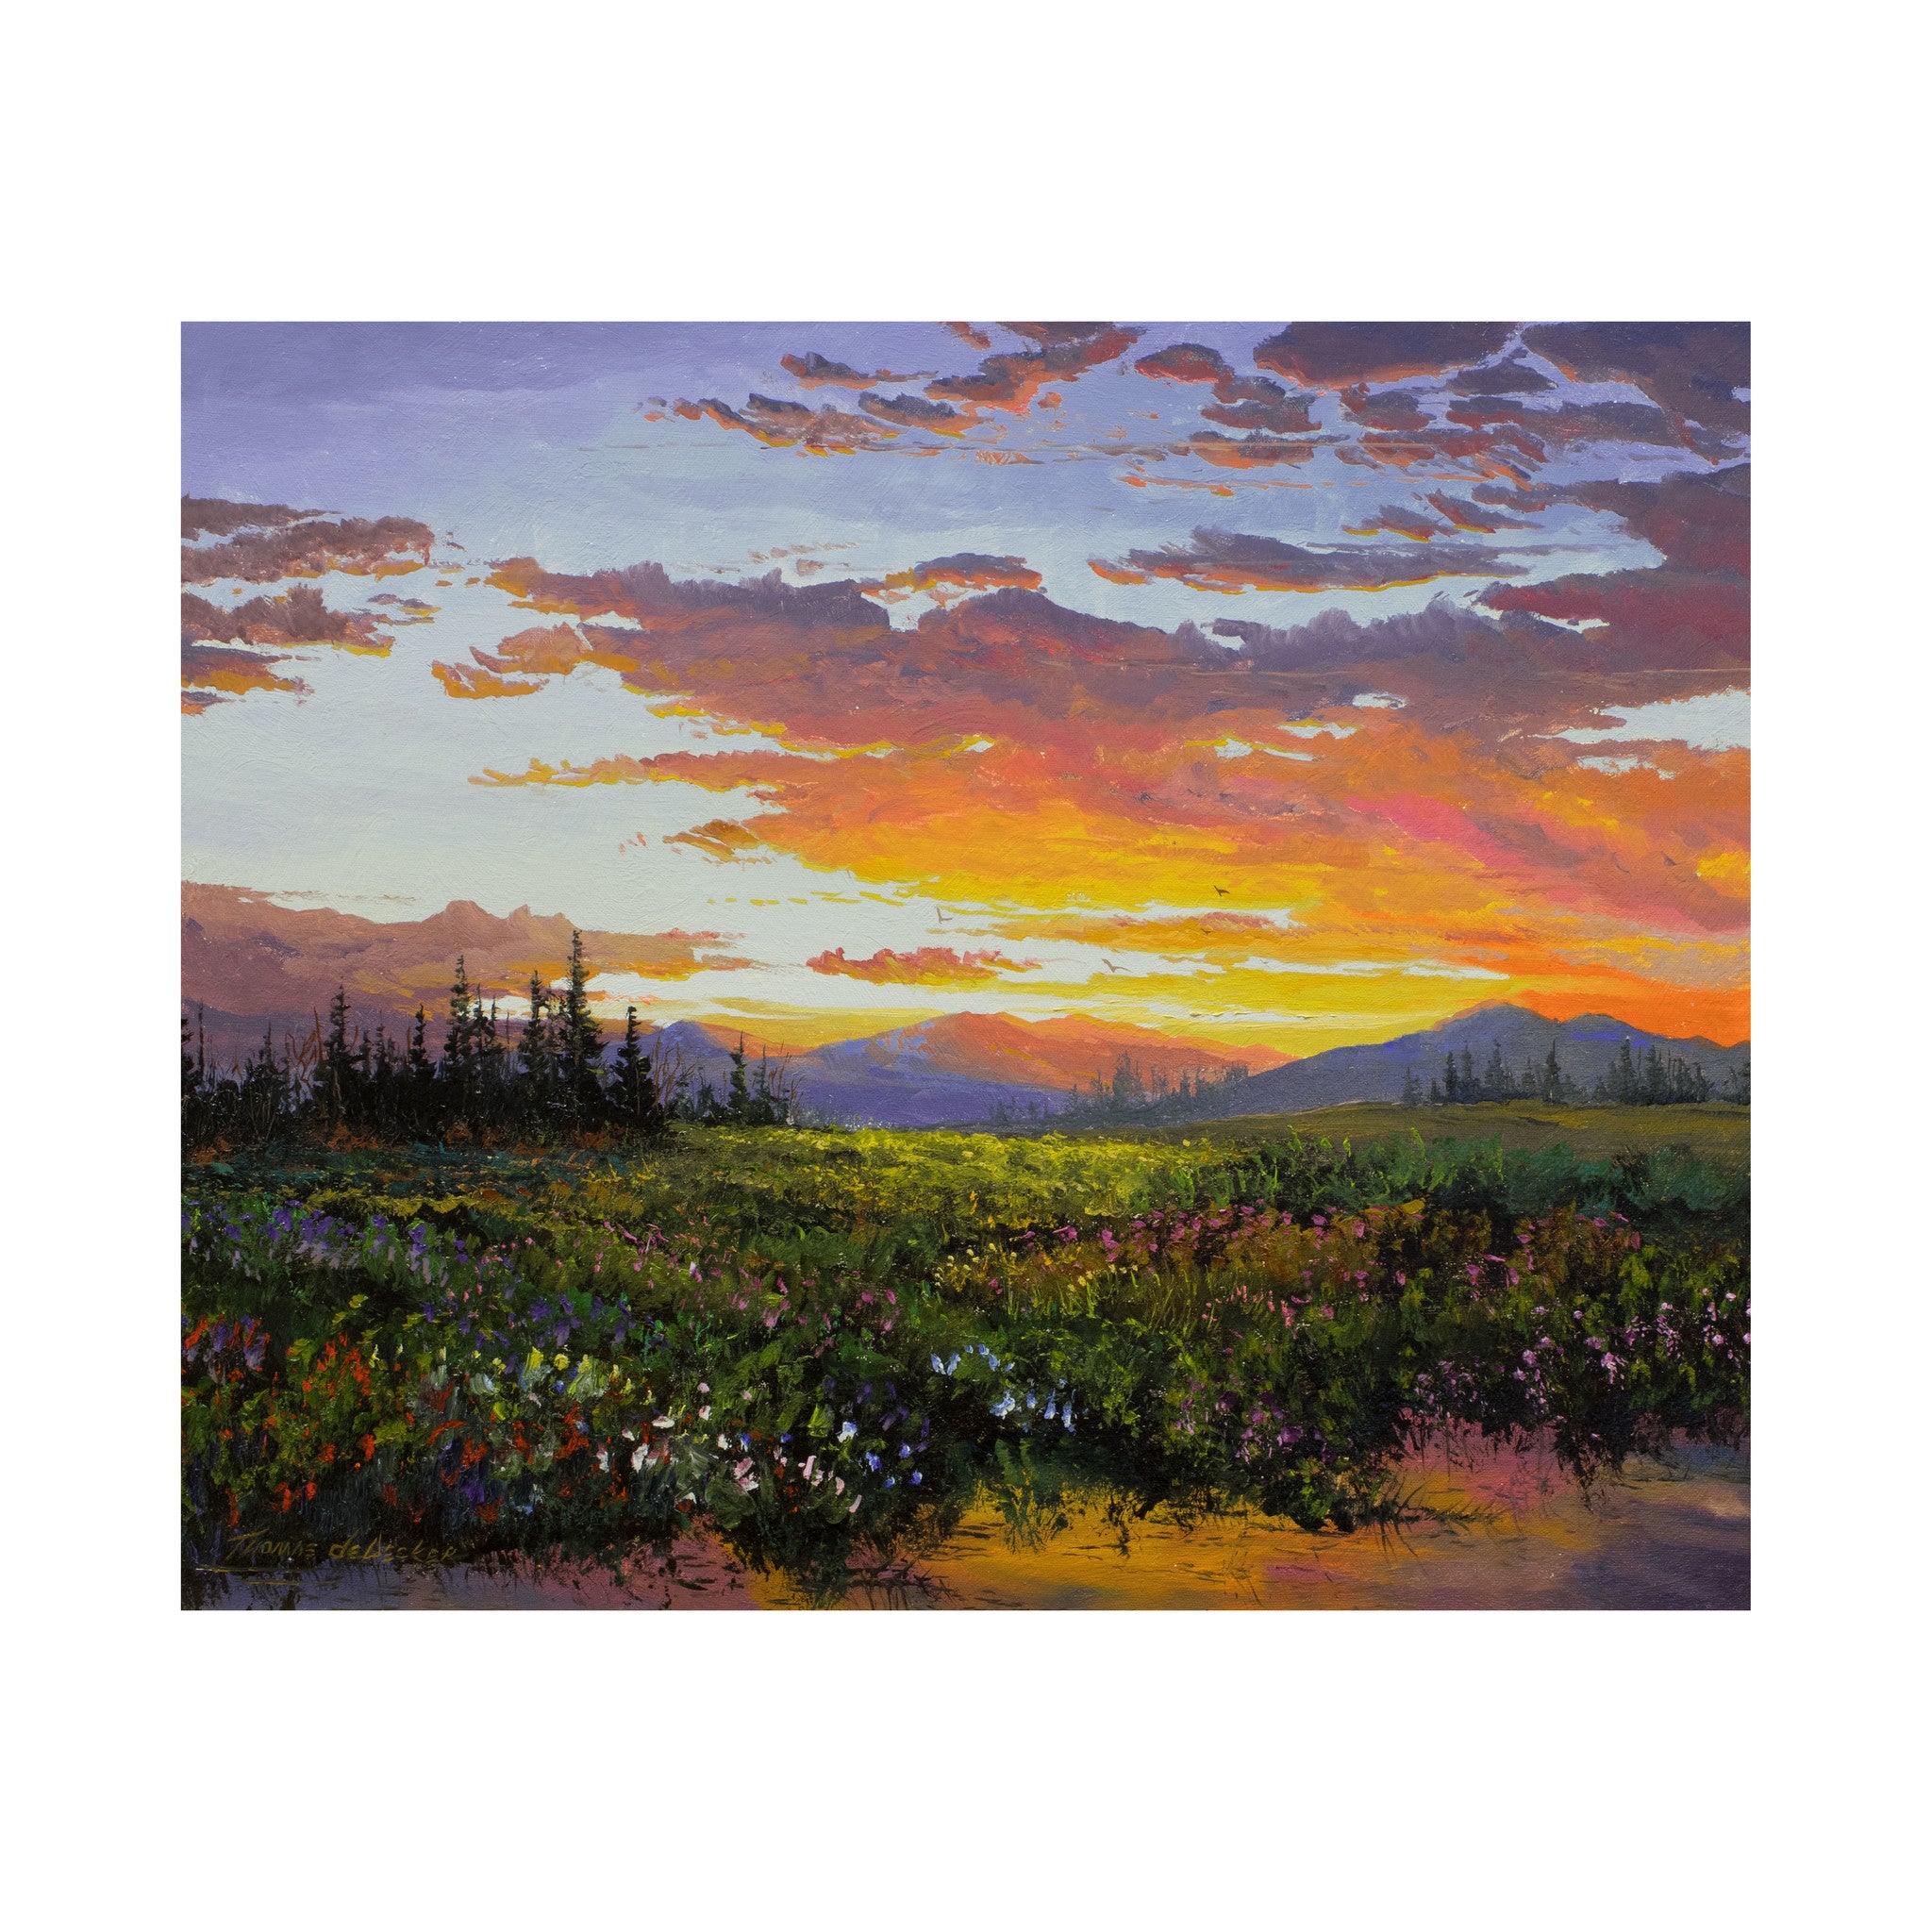 Sunset and Flowers - Summer by Thomas deDecker, Fine Art, Painting, Landscape